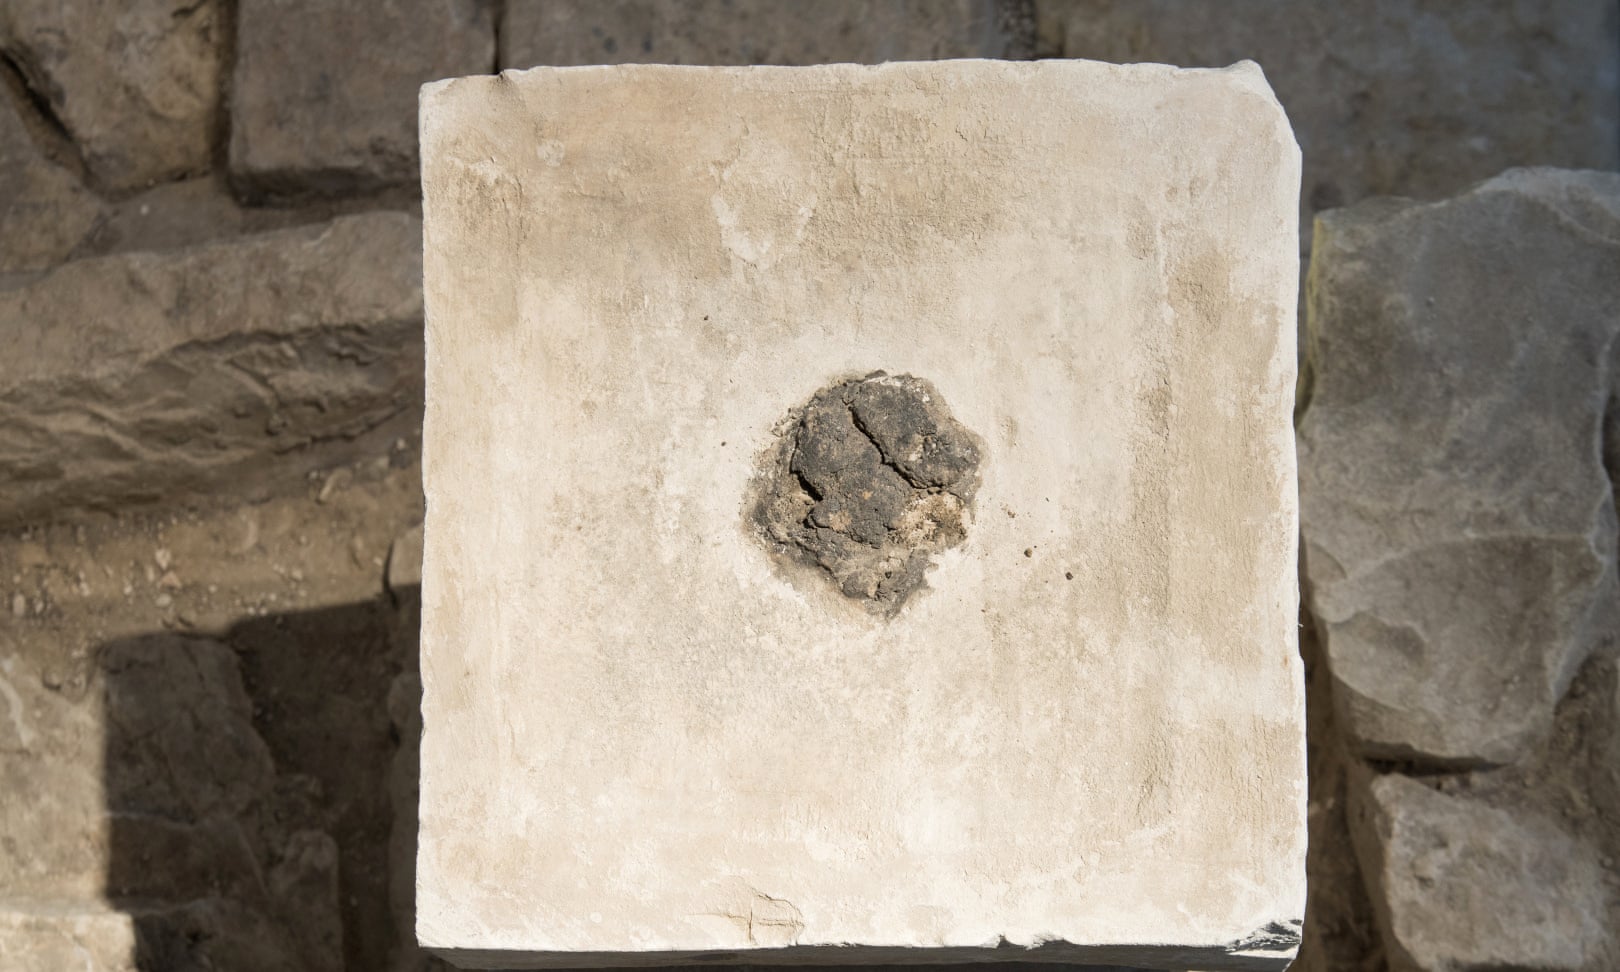 Cannabis residue on artefacts from an ancient temple in southern Israel. Archaeologists say it provides the first evidence of the use of hallucinogens in Judaism. Photograph: Laura Lachman/AP